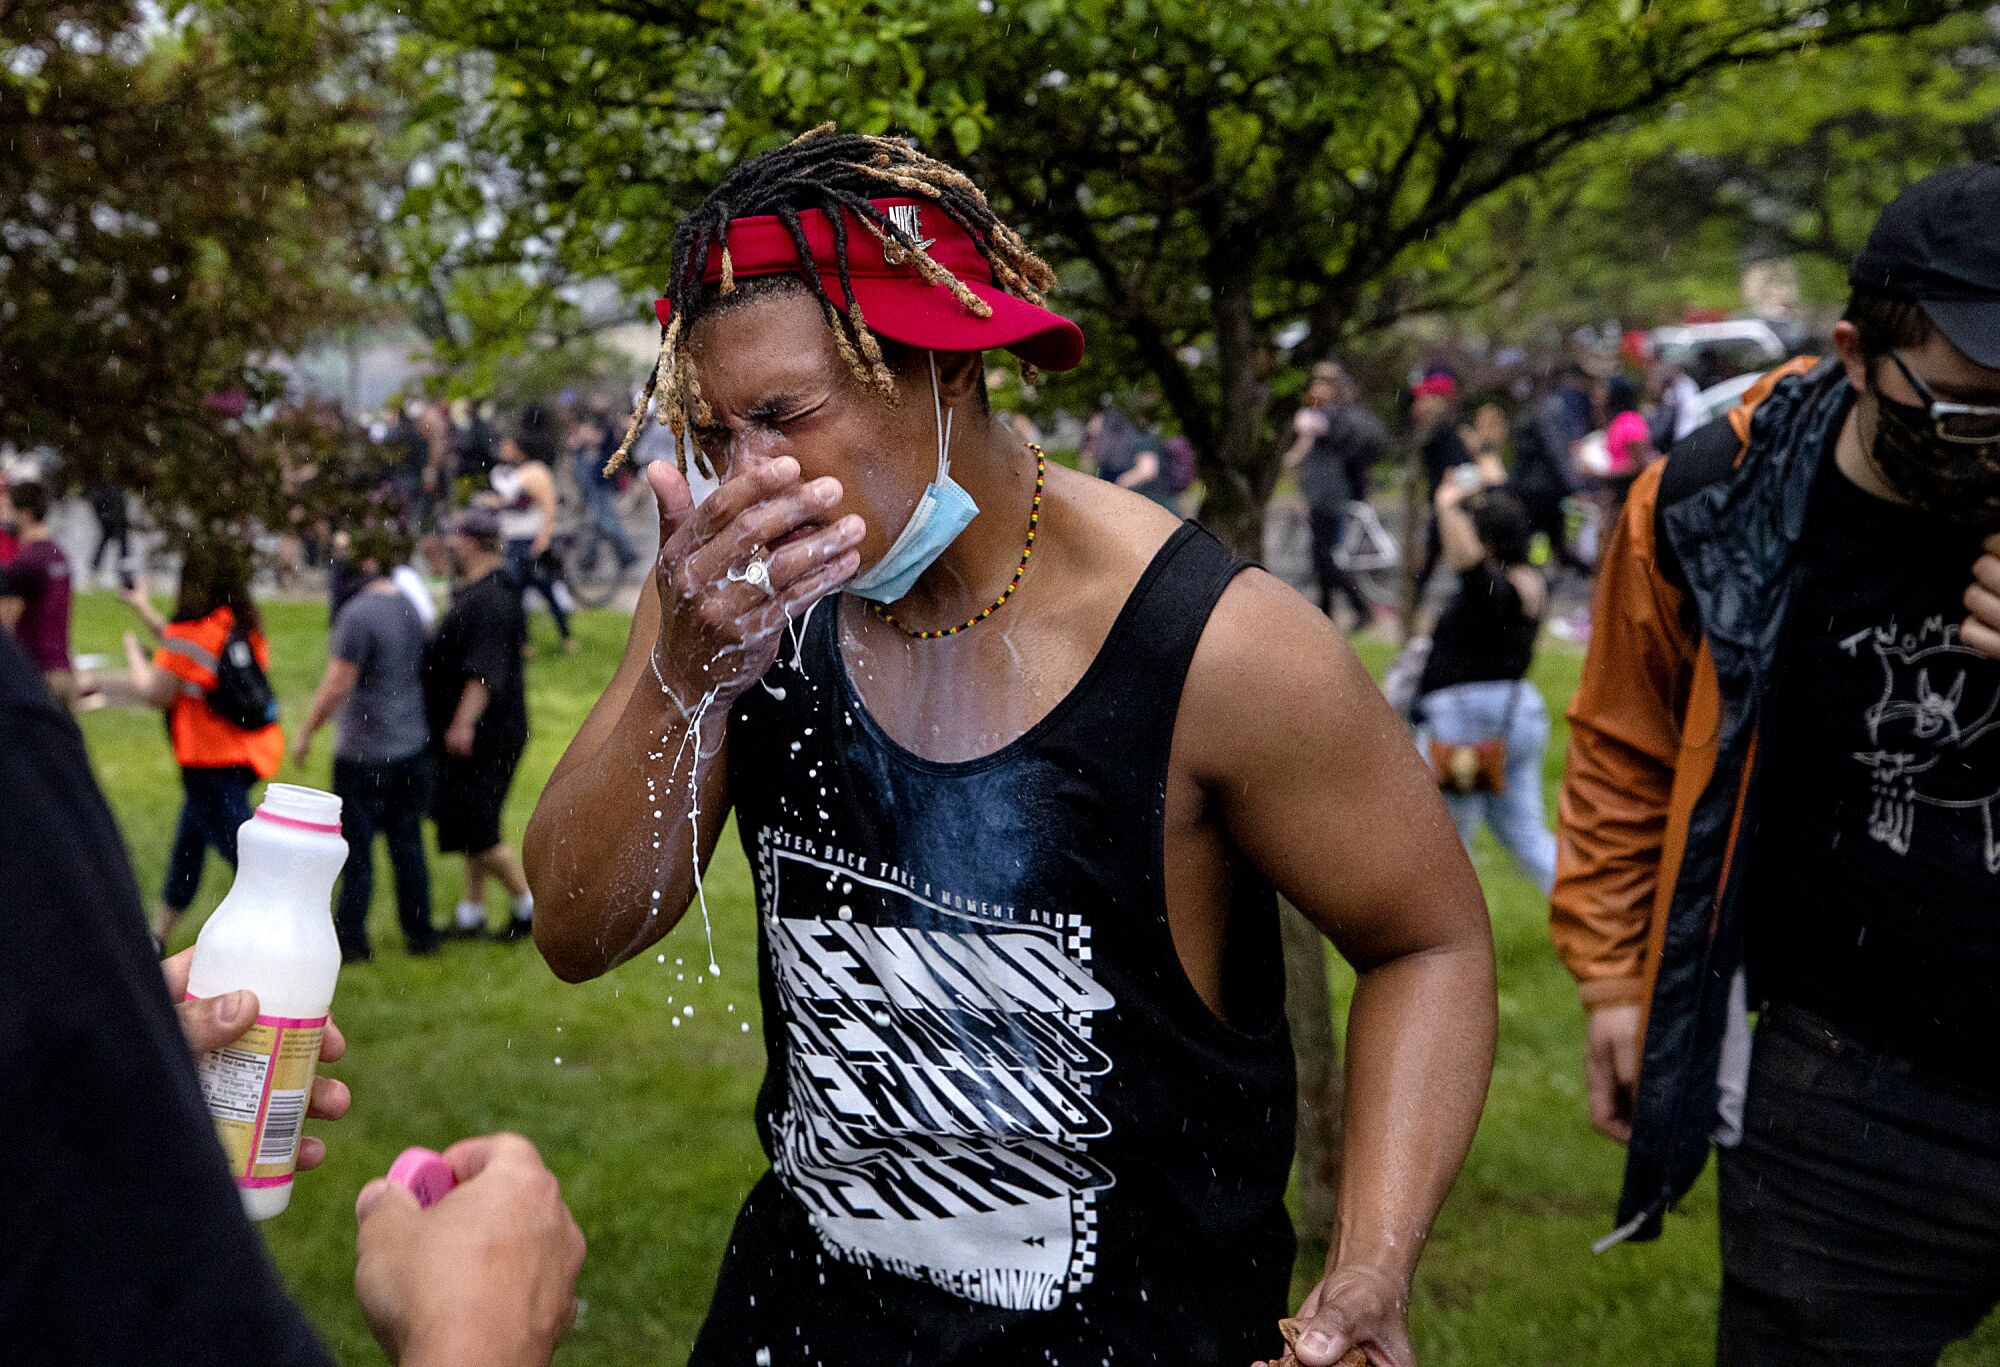 A protester wipes his face after being doused with milk after exposure to percussion grenades and tear gas.